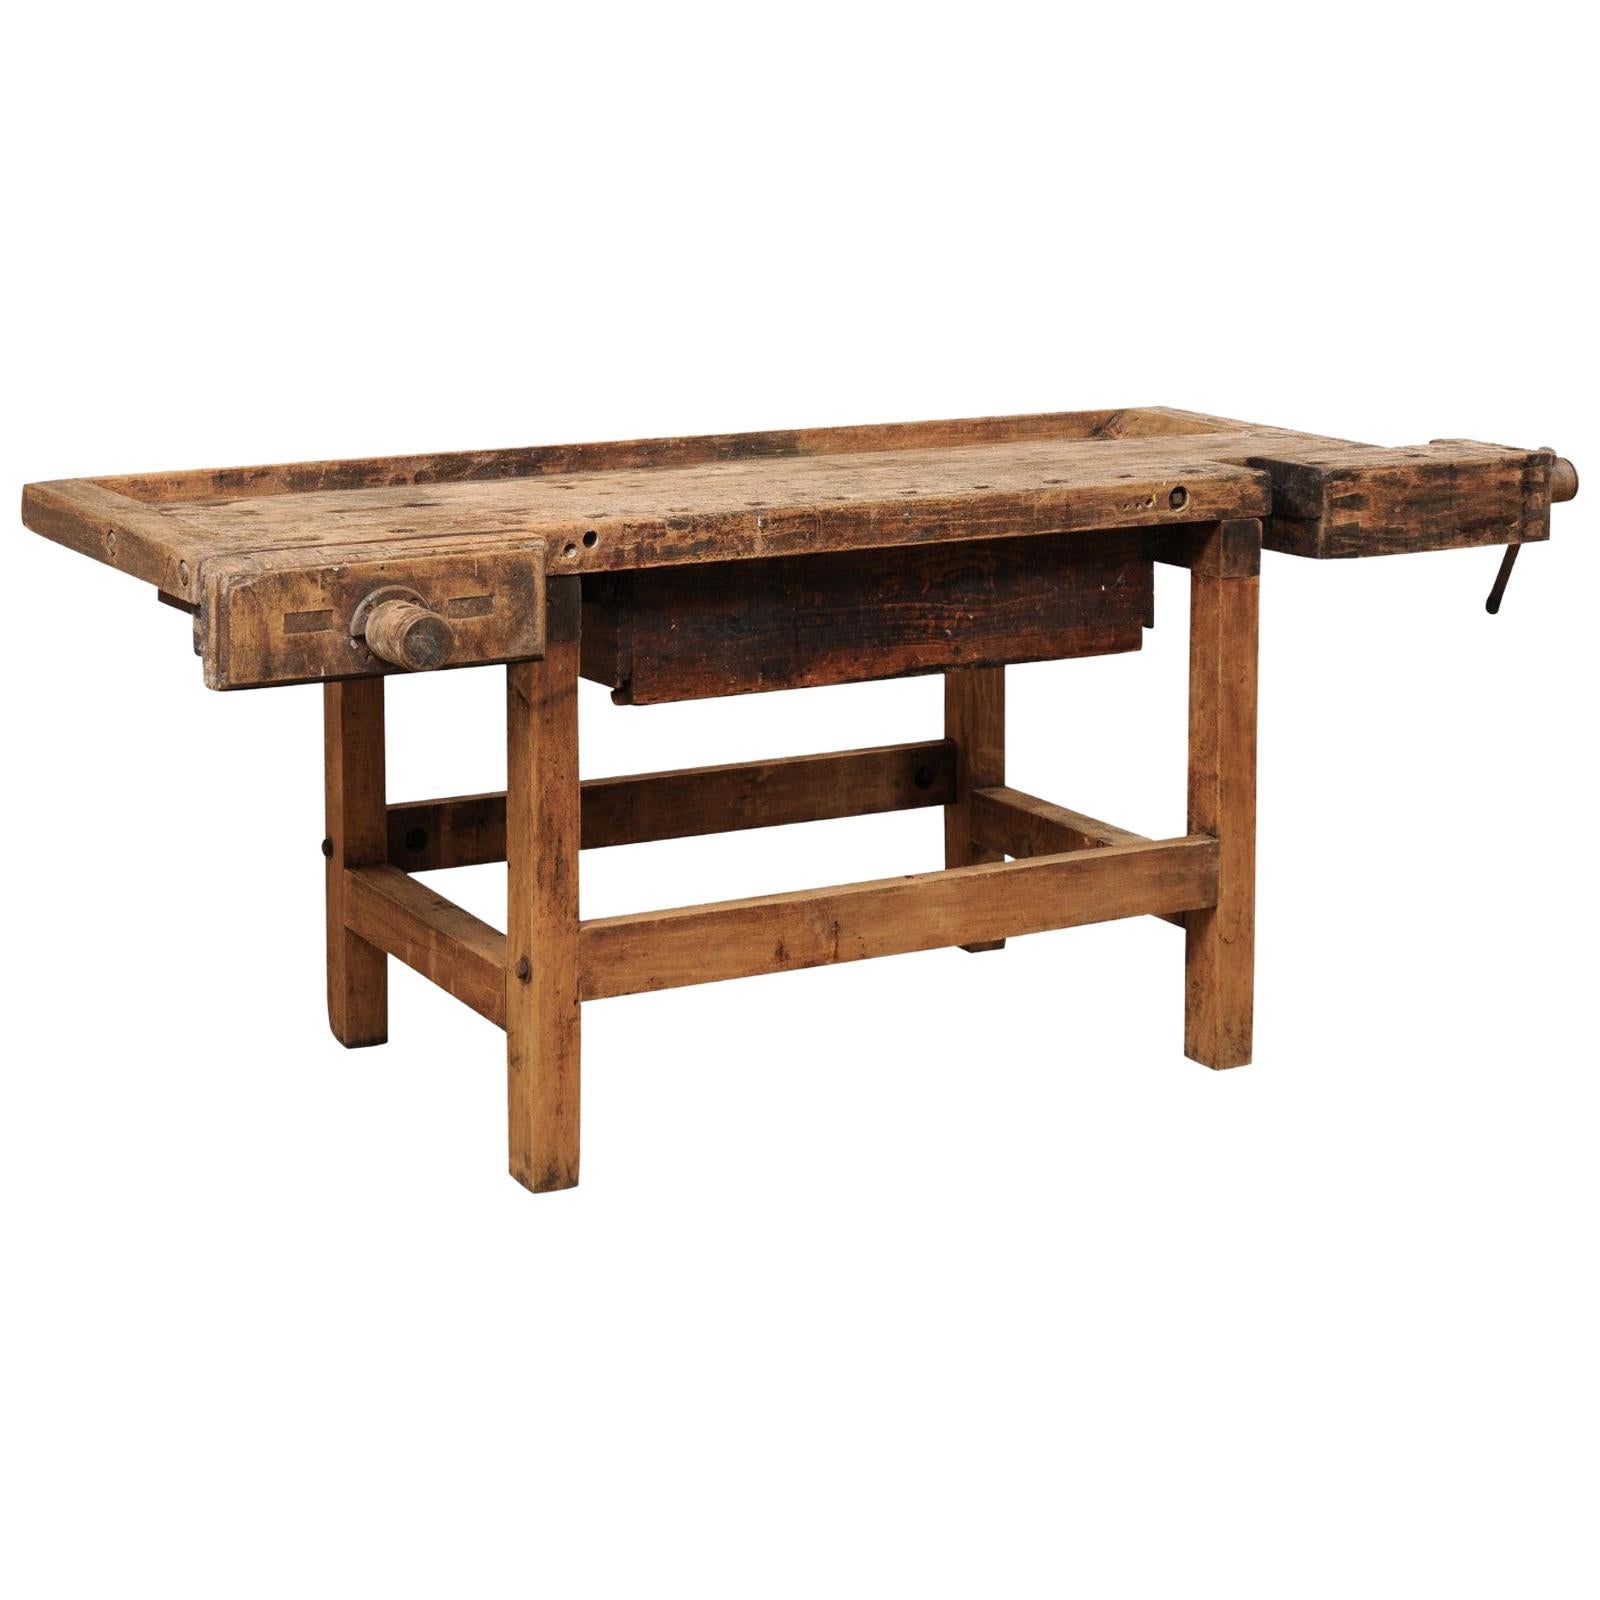 Early 20th Century Wooden Work Bench- Would Make Unique Extra Kitchen Work Space